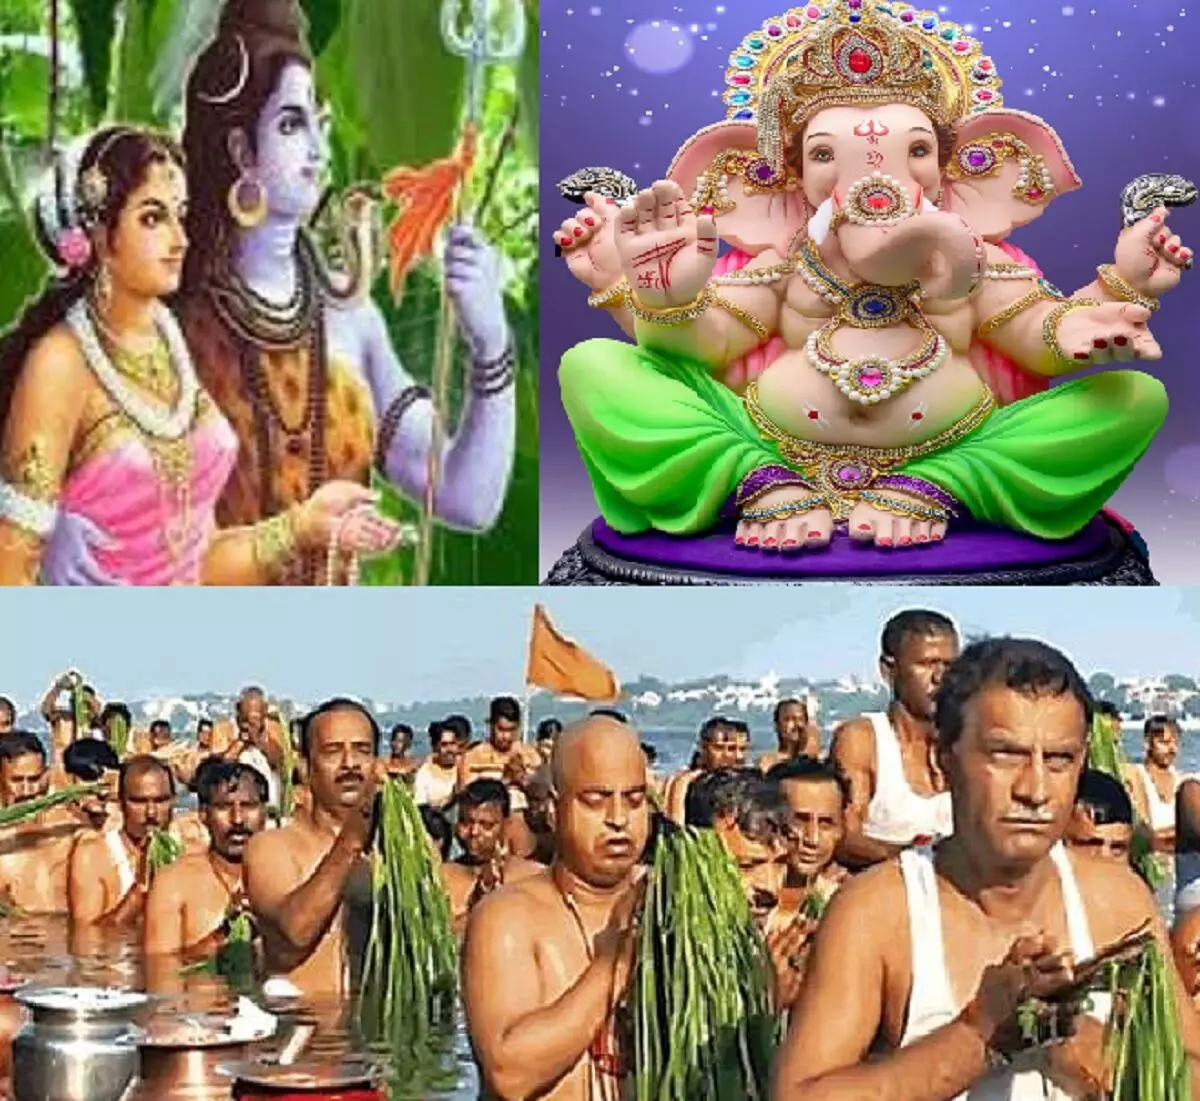 Know when is Ganesh Chaturthi, Hartalika Teej and when will it be Pitru Paksha, see the list of festivals falling in the month of September